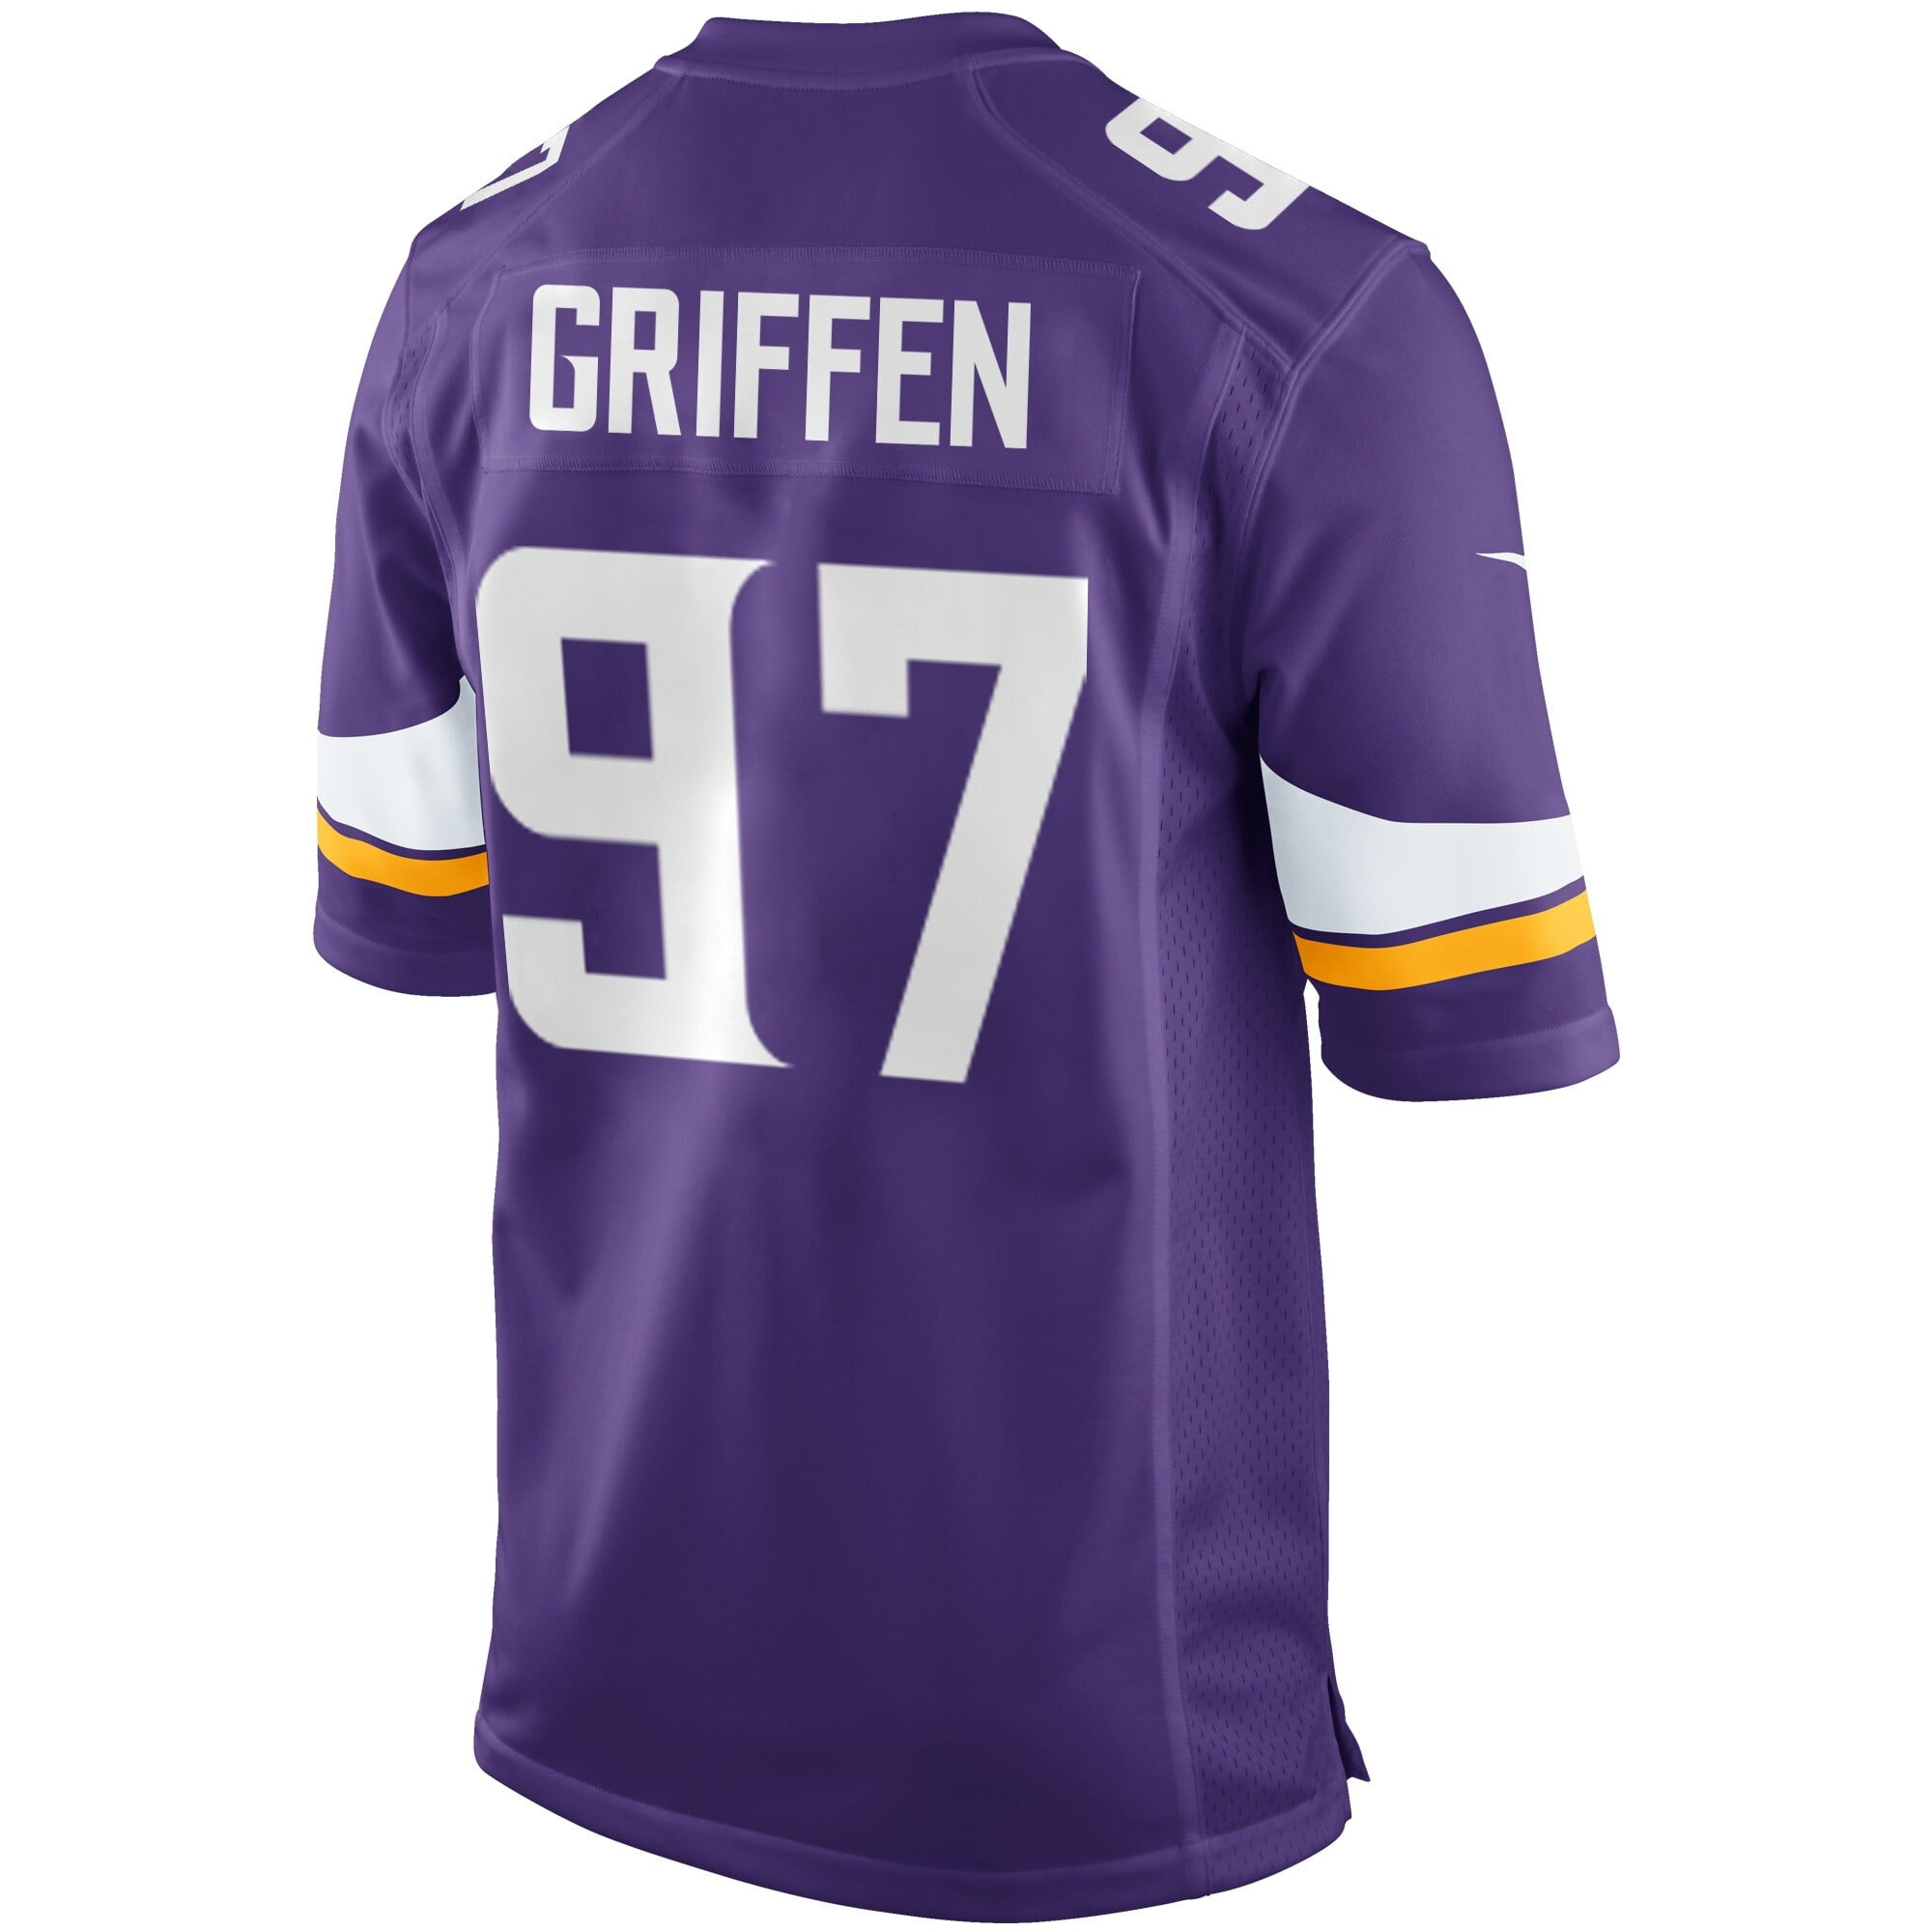 Everson Griffen Minnesota Vikings Youth Nike Team Color Game Jersey - Purple